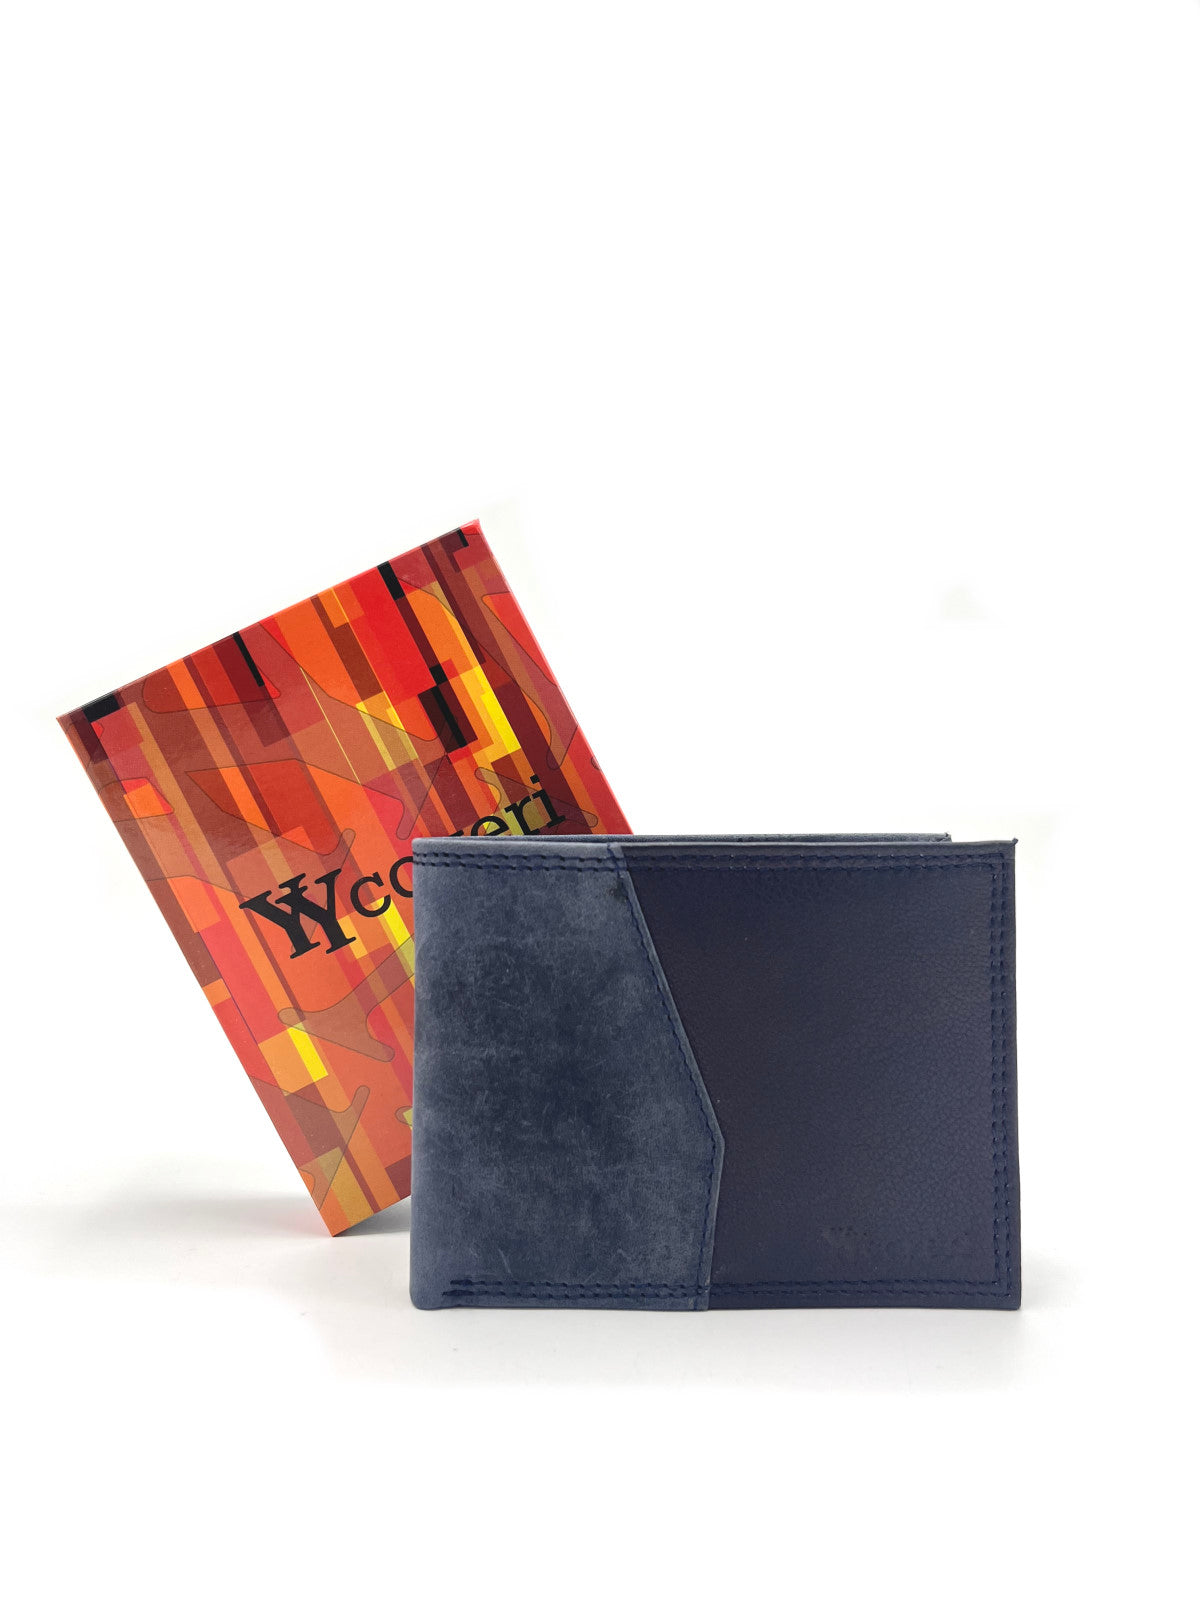 Genuine leather wallet for men, Brand You Young Coveri, art. NETT1123.422